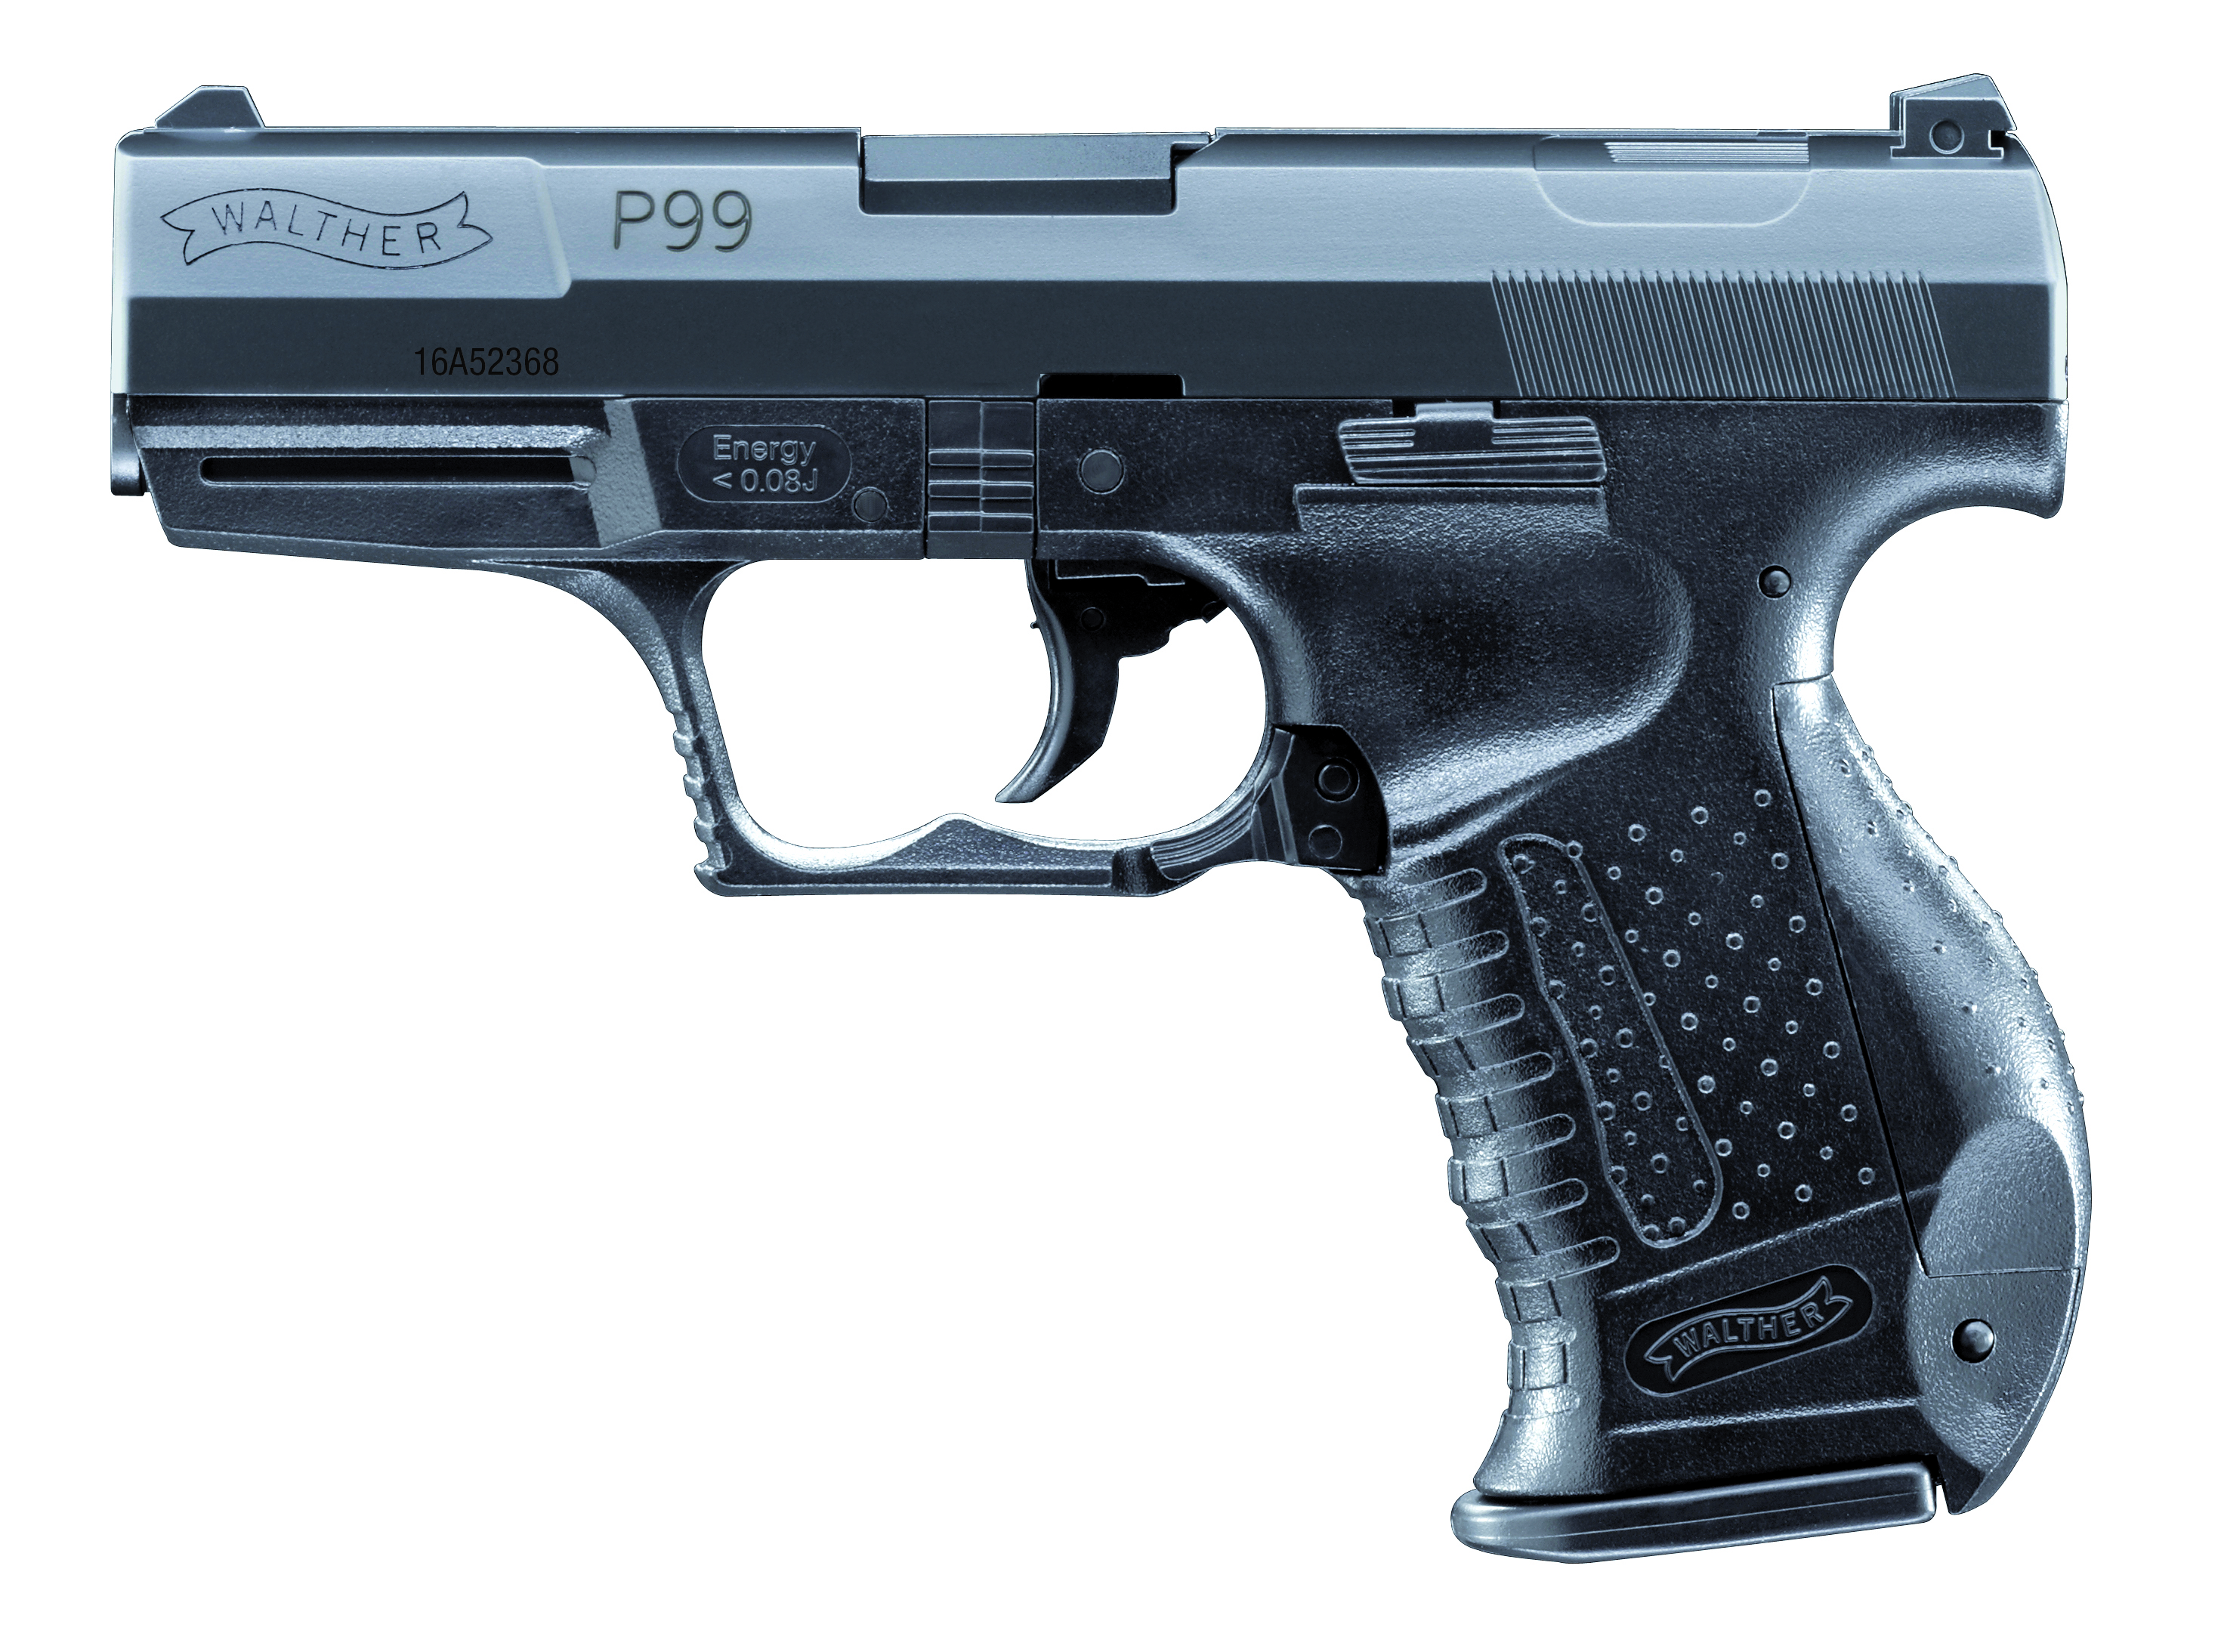 WALTHER (Umarex) Airsoft Pistol Toy P99